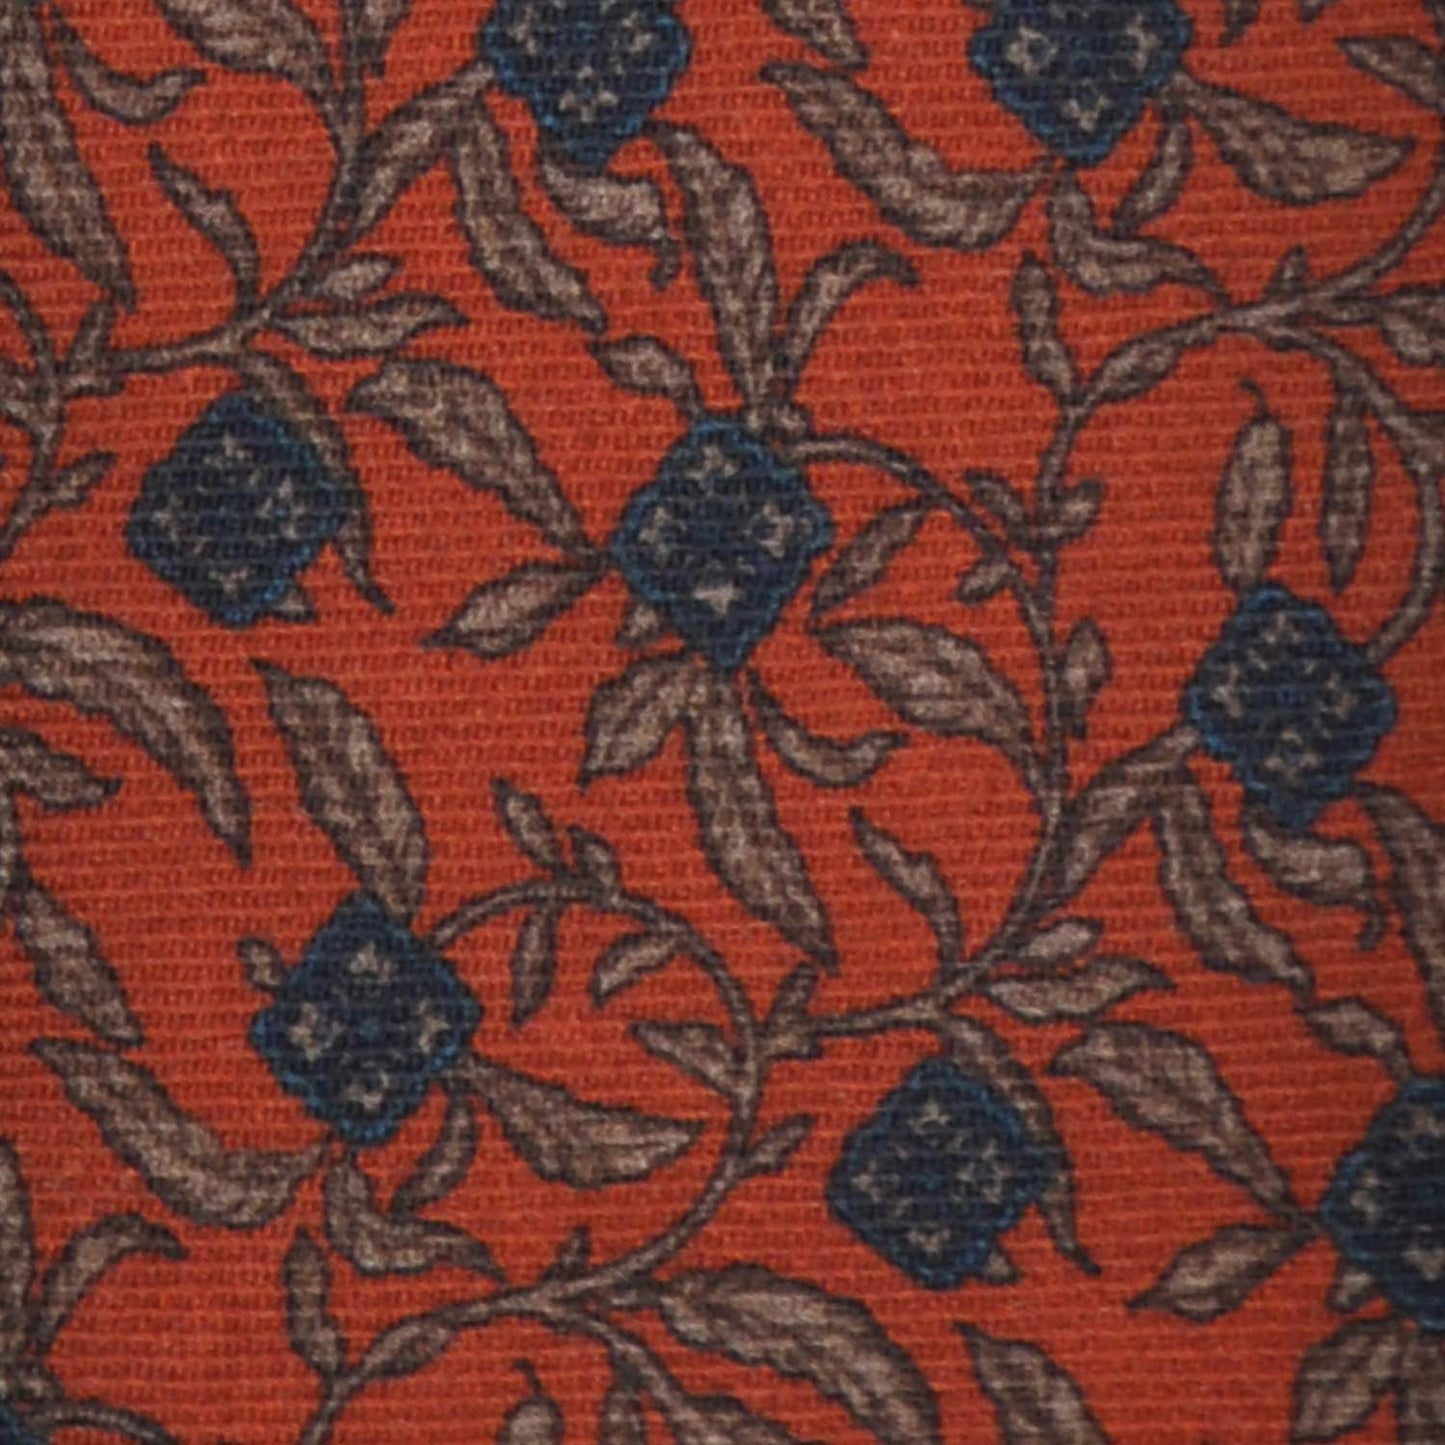 Orange Wool Tie Liberty Flowers Printed. Men's orange tie made with finest Italian wool soft fabric to the touch, unlined tie 3 folds, regular knot, blue and beige flowers liberty pattern